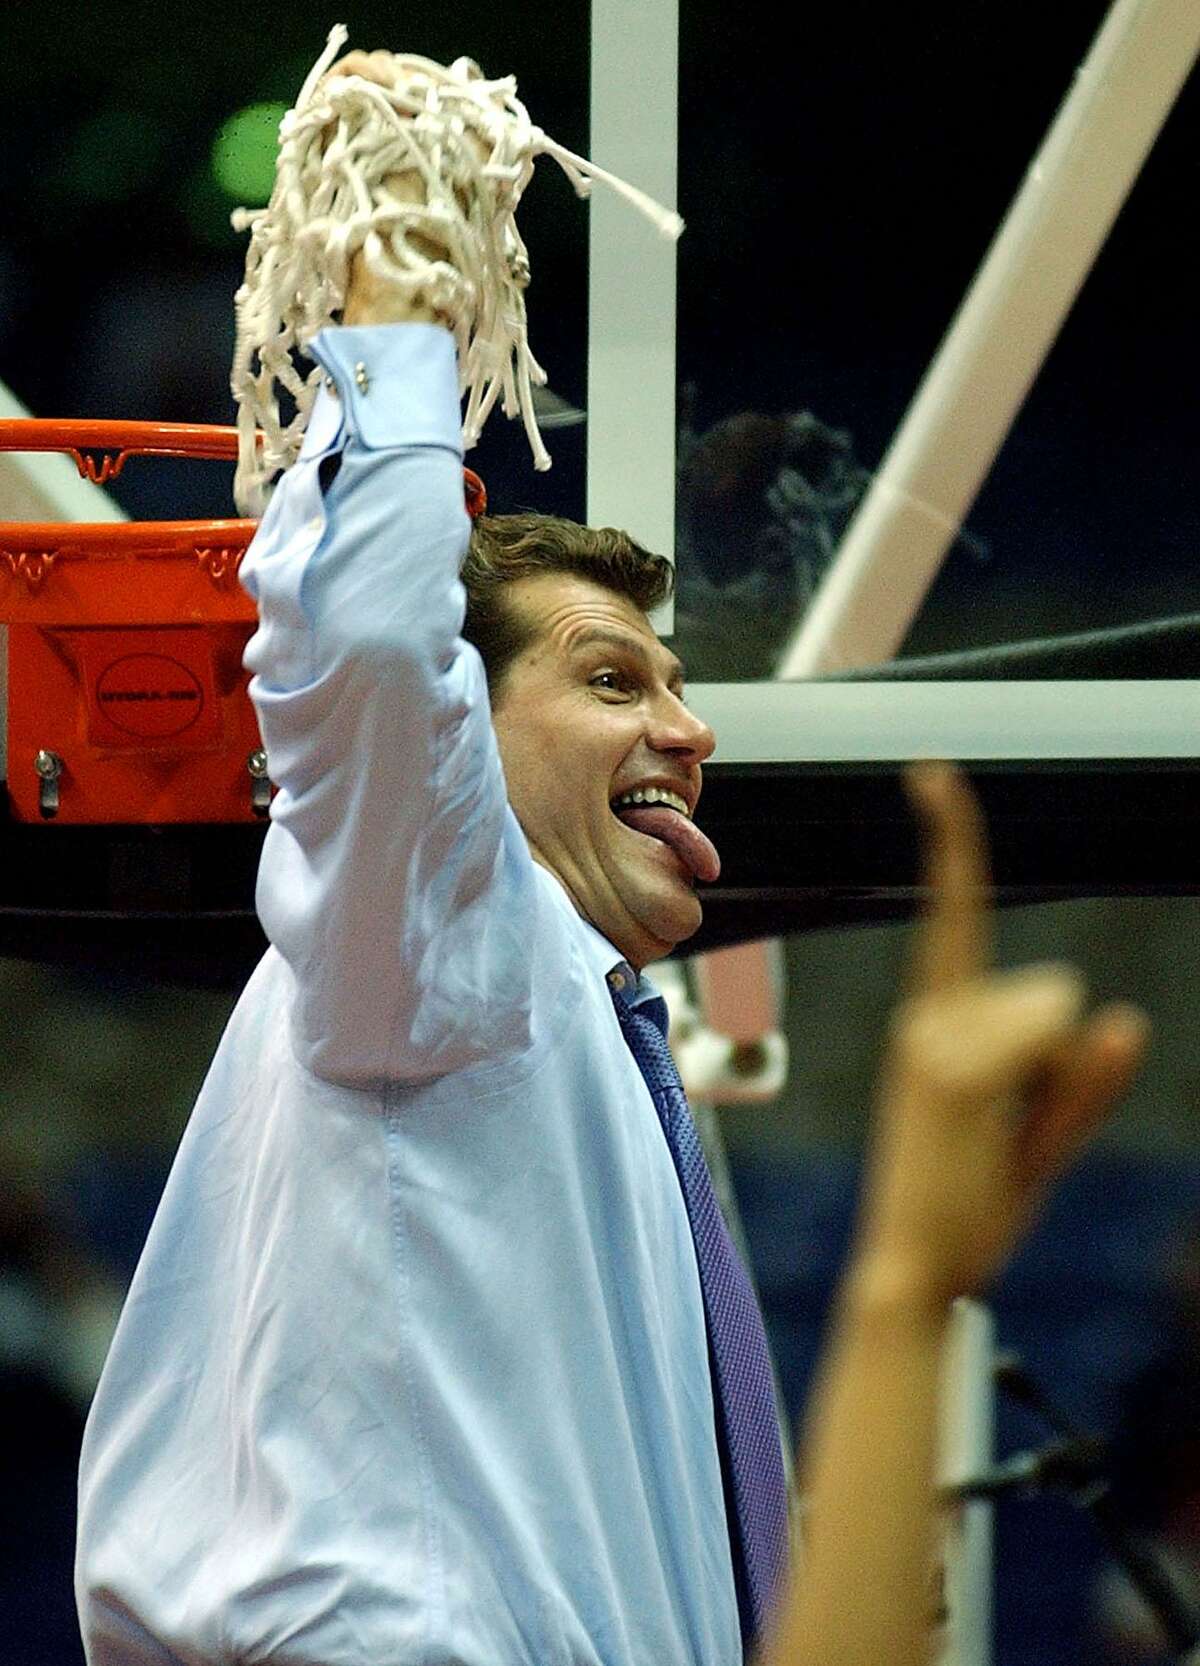 UConn coach Geno Auriemma celebrates after cutting down the net after UConn won the National Championship at the Alamodome in San Antonio on Sunday, Mar. 31, 2002. (Kin Man Hui/staff)